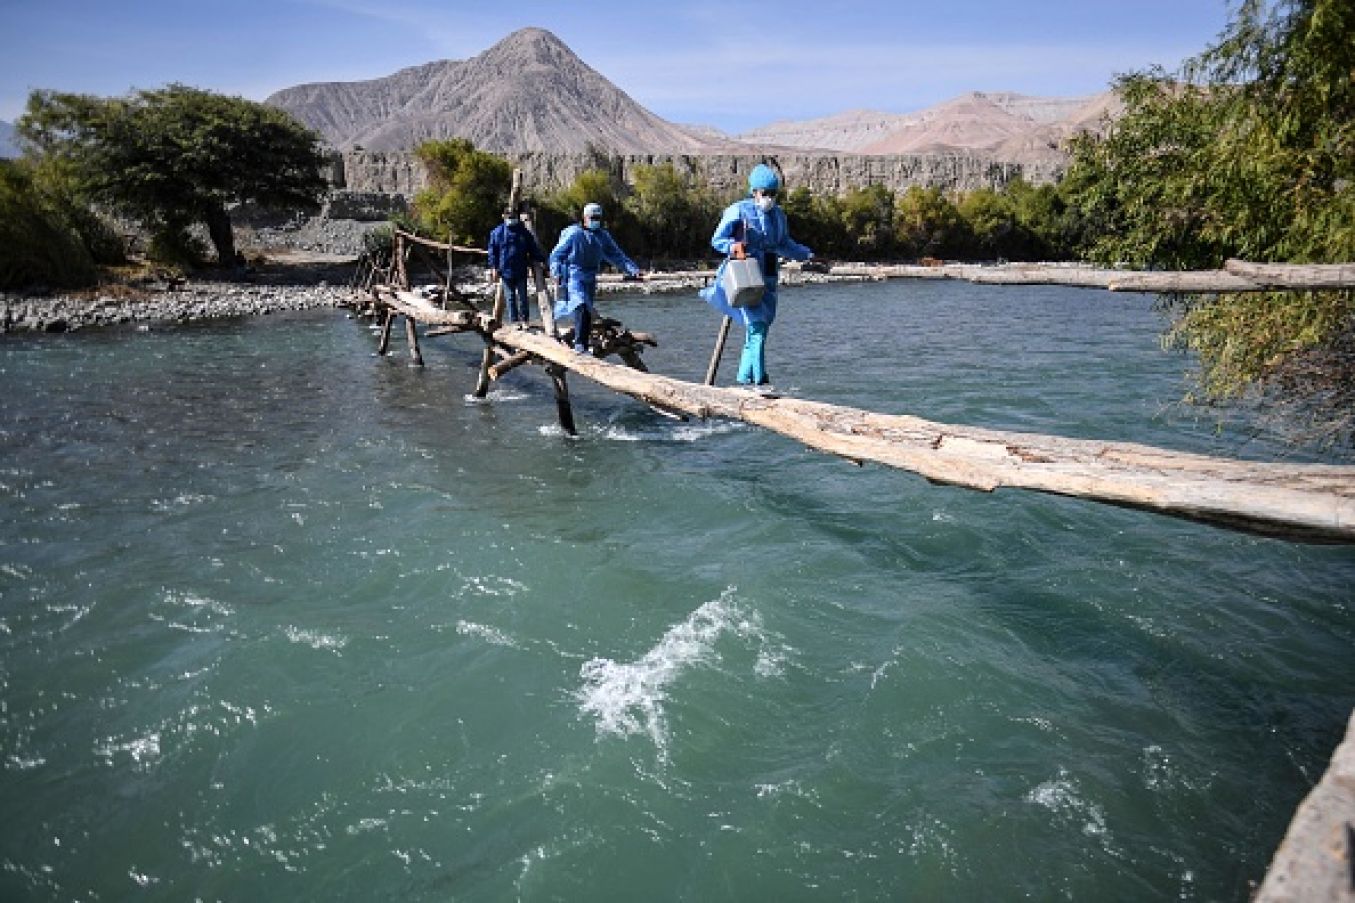 Health Workers Cross The Camana River To Inoculate Elderly Citizens With Doses Of The Pfizer-Biontech Vaccine Against Covid-19, In Southern Peru. Photo:  Diego Ramos / Afp Via Getty Images)